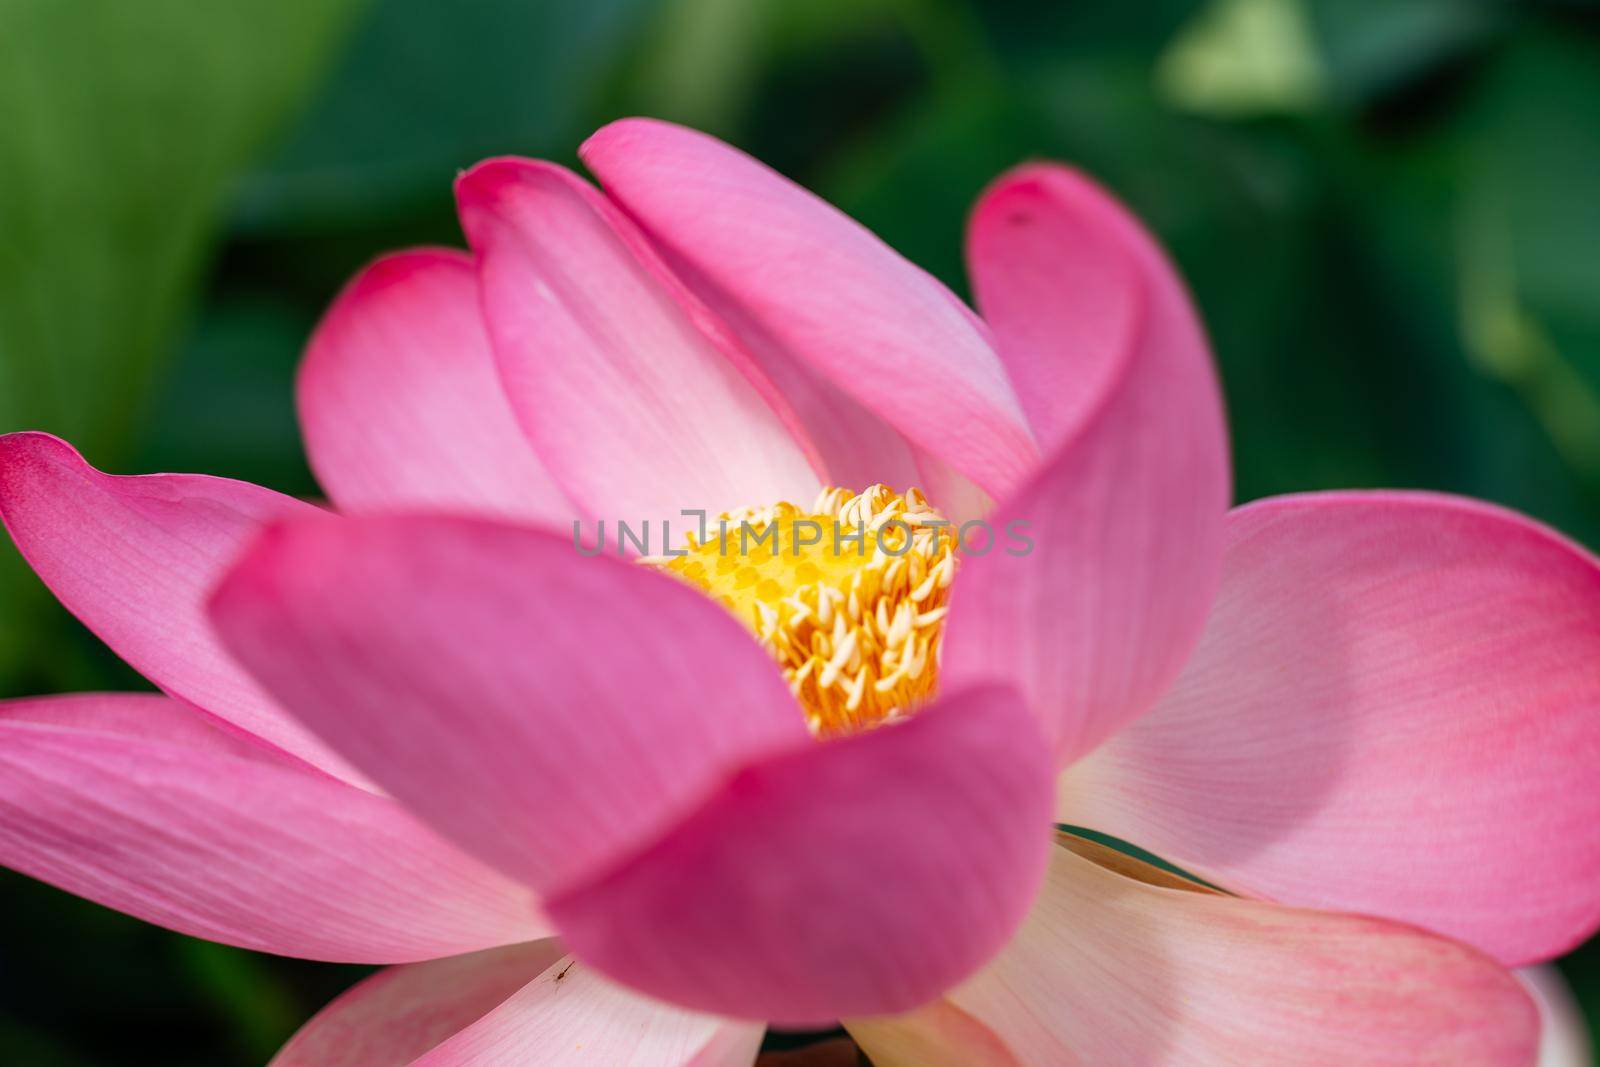 A pink lotus flower sways in the wind. Against the background of their green leaves. Lotus field on the lake in natural environment